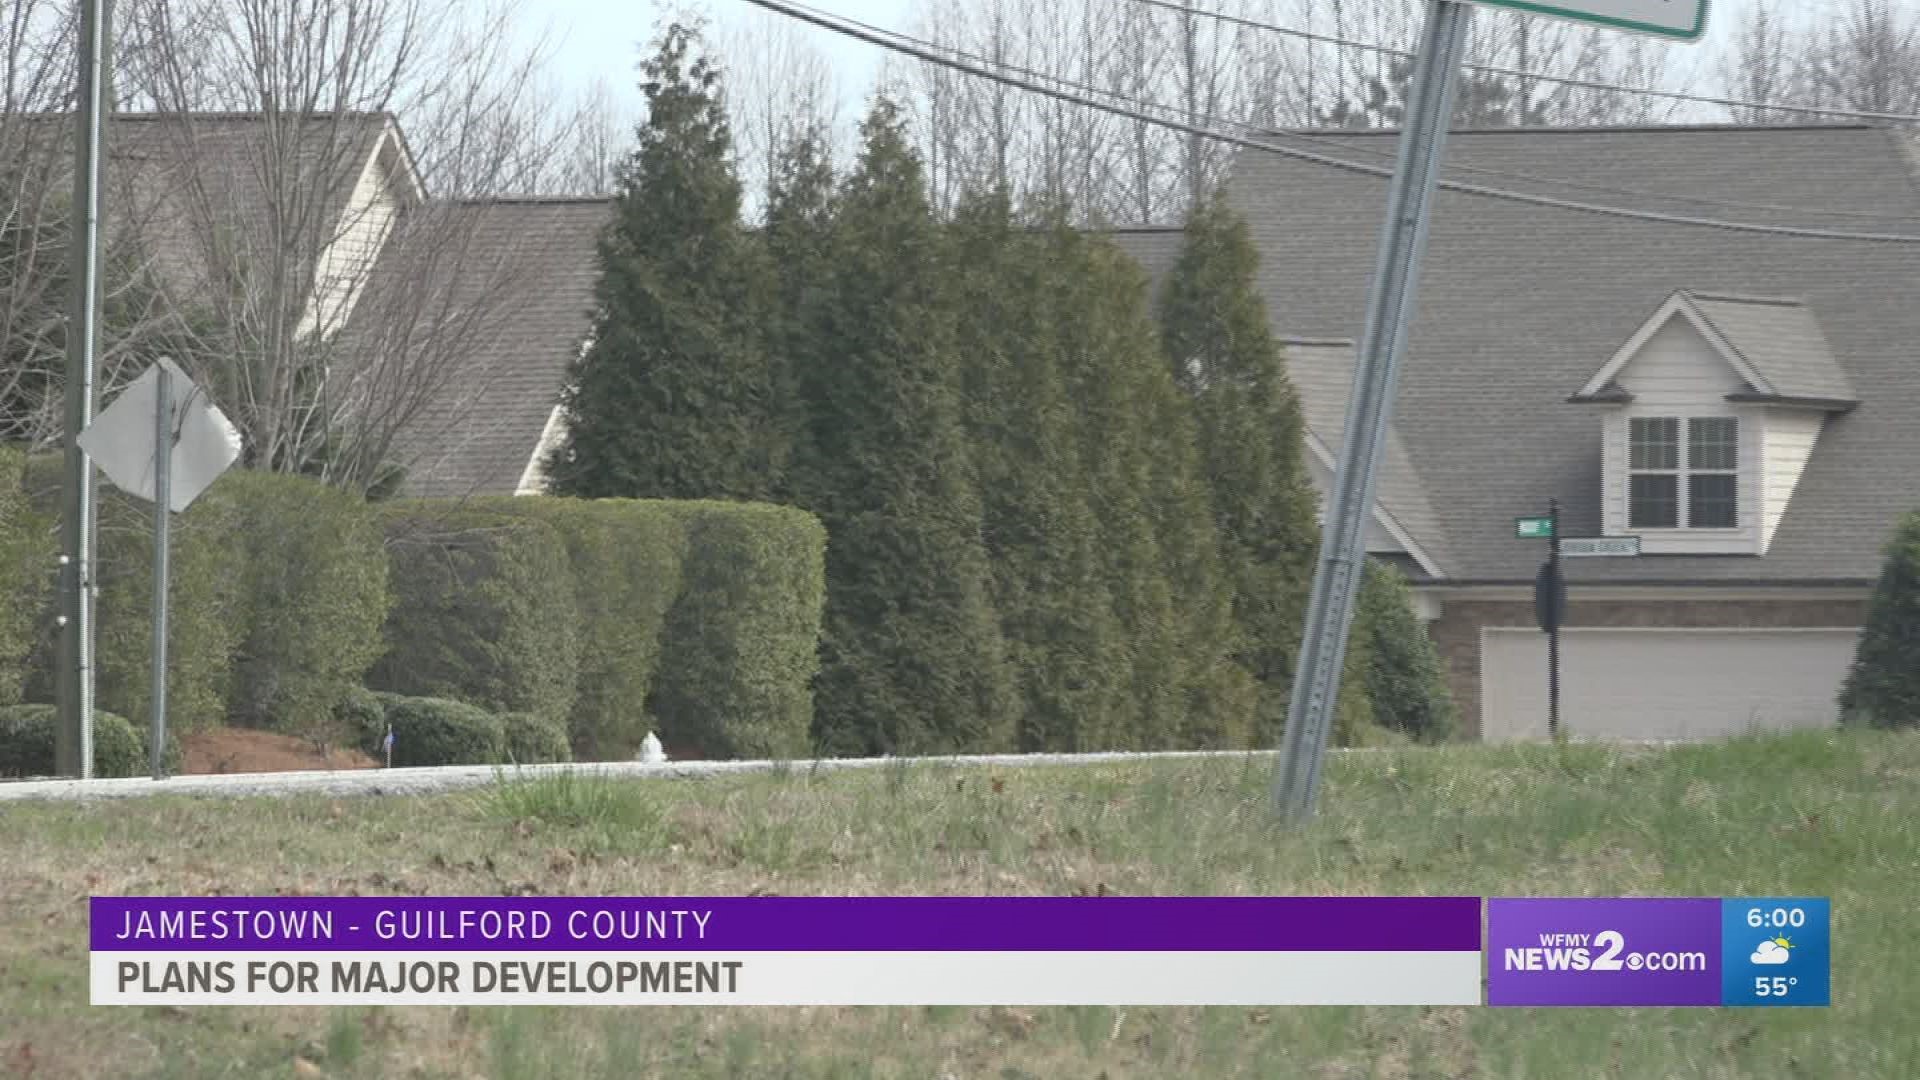 If current plans are approved the town of Jamestown could double in size.